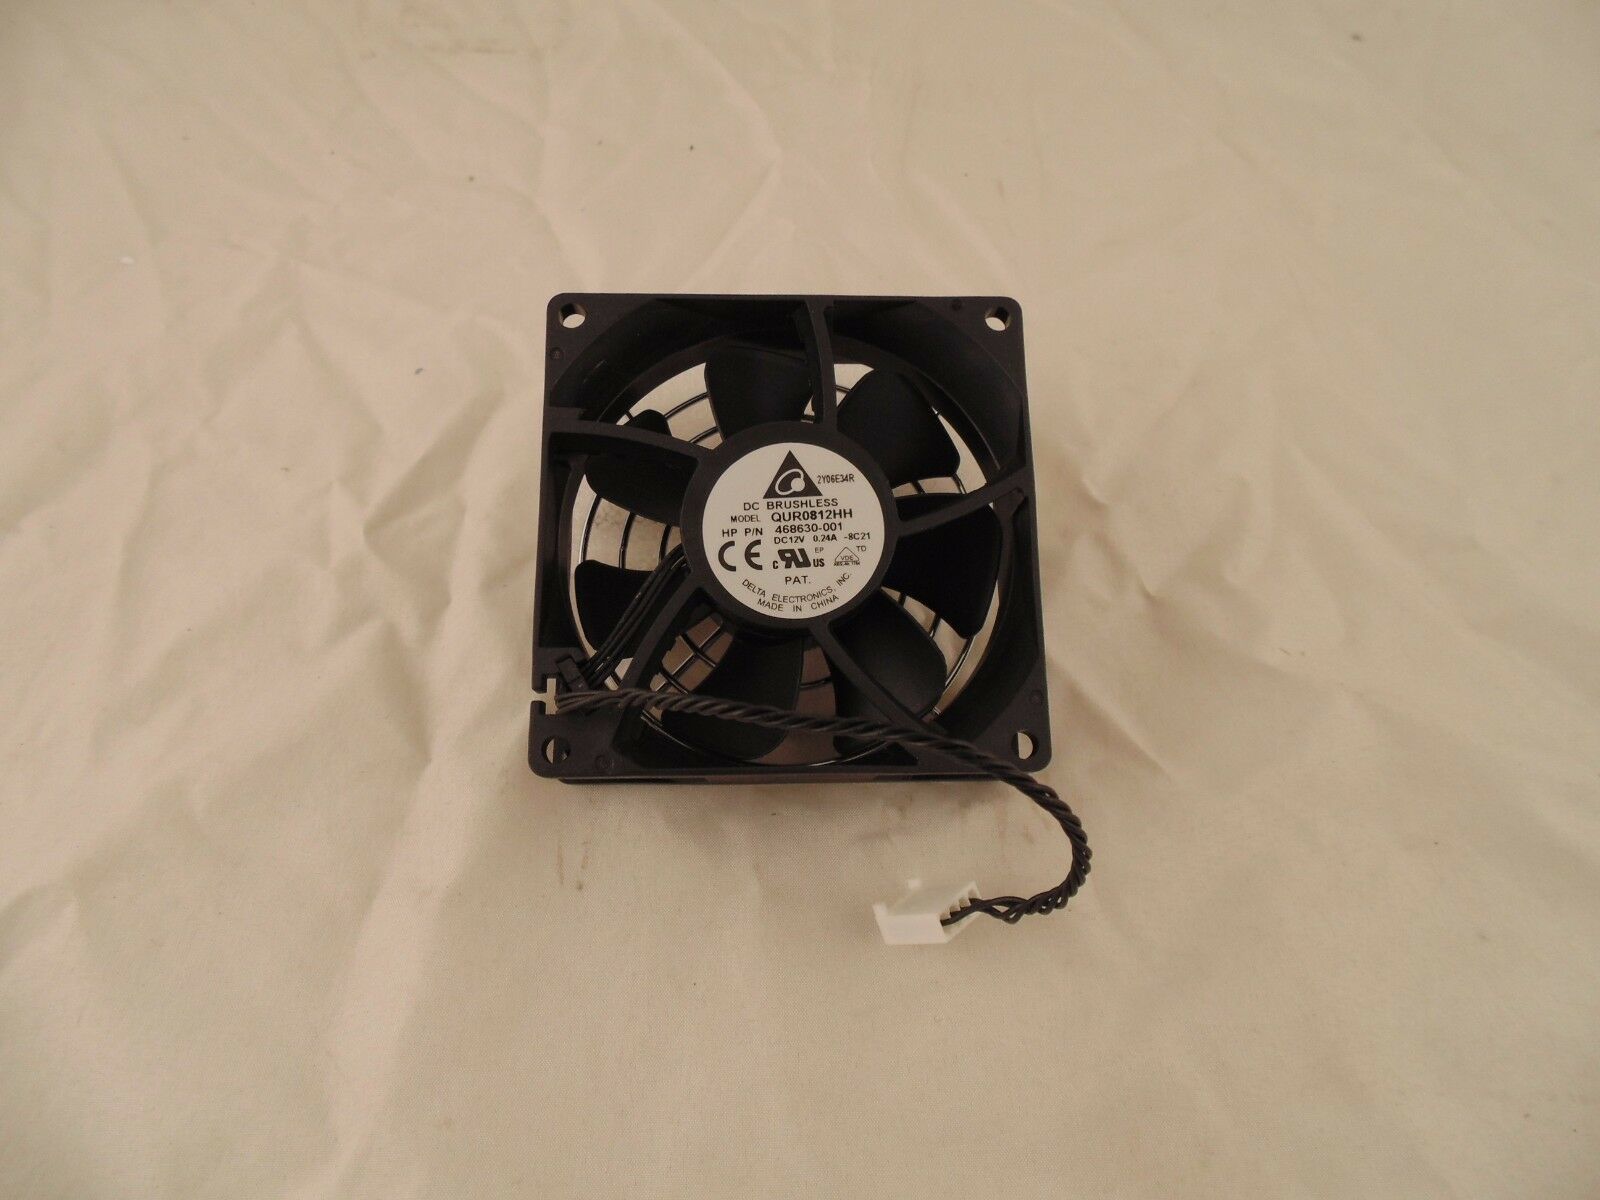 Primary image for Delta QUR0812HH HP 468630-001 80x80x25mm 4 Pin 12V 0.24A Fan 29-4